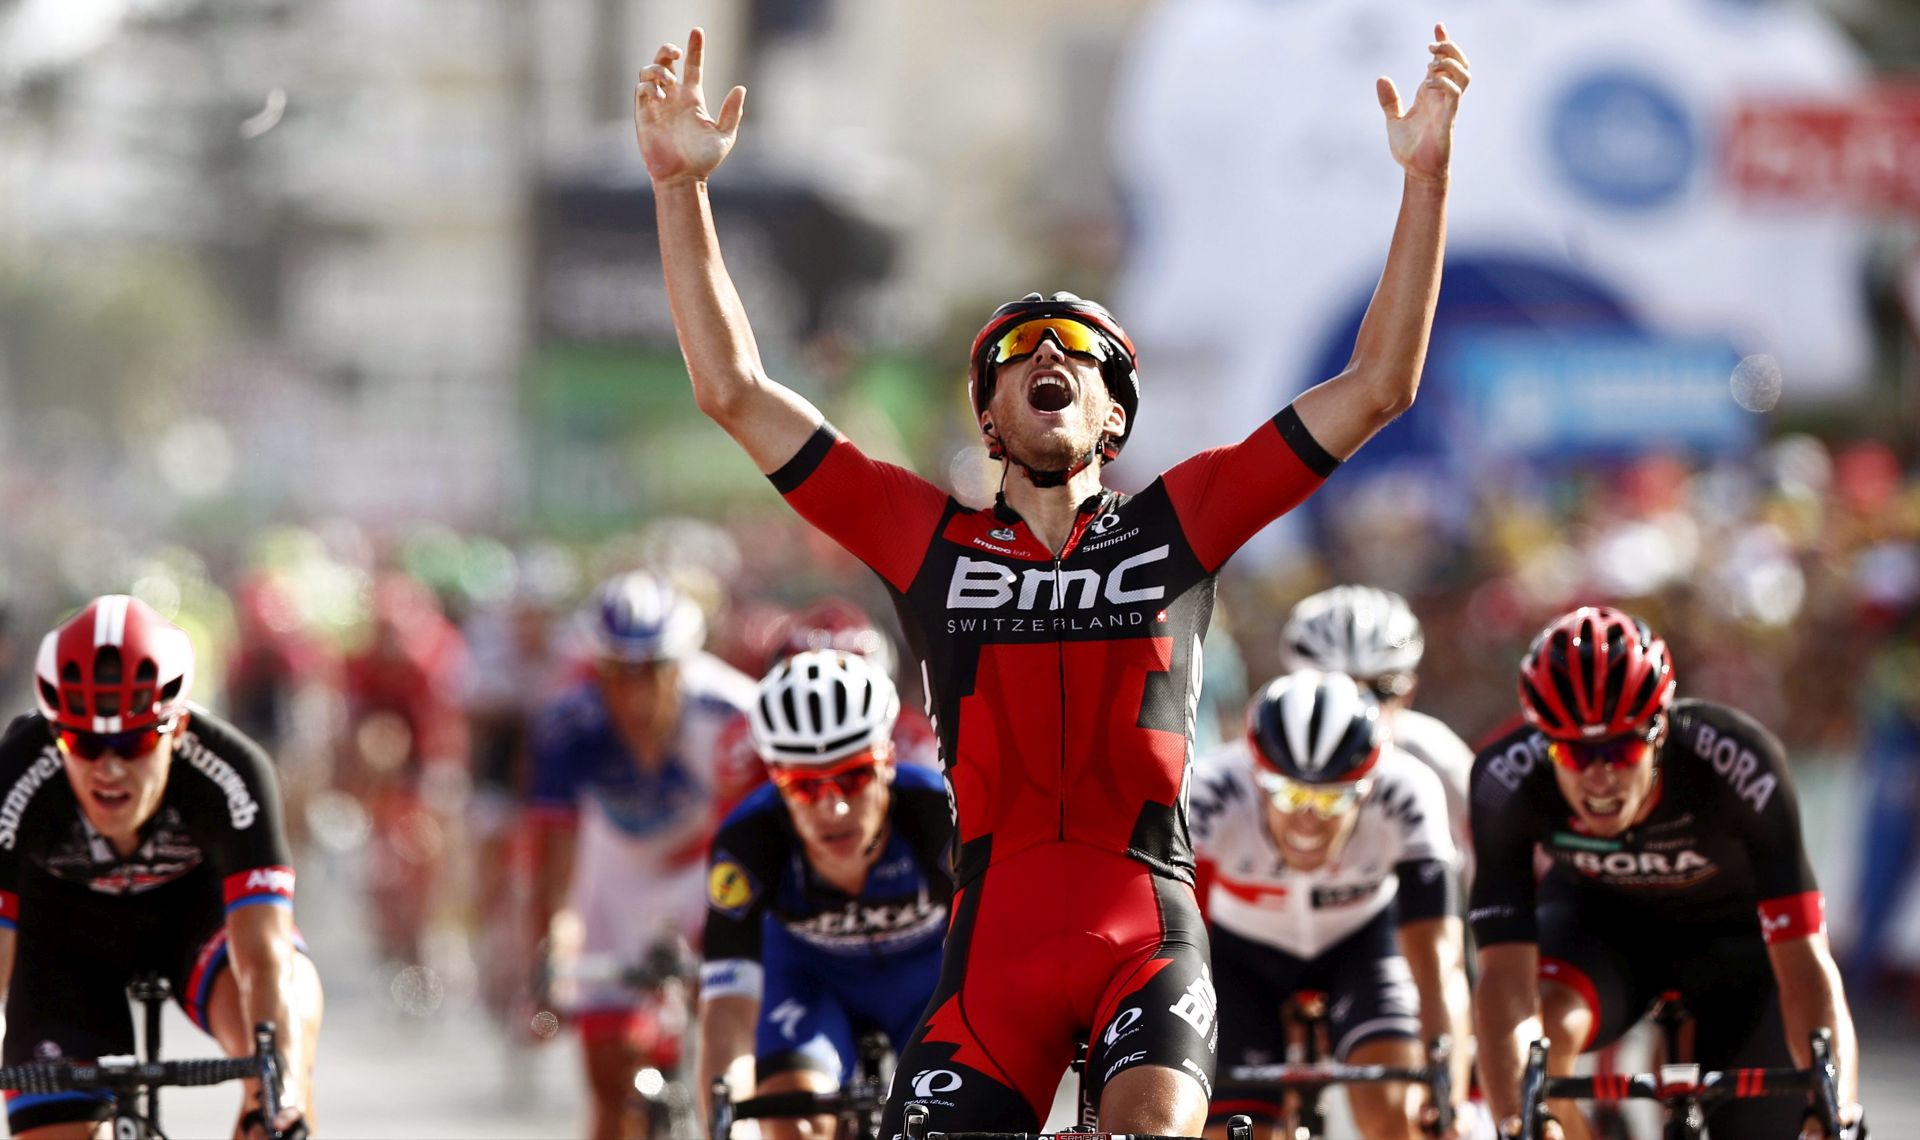 epa05525637 Luxembourg rider Jean-Pierre Drucker (front) of the BMC Racing Team celebrates while crossing the finish line to win the 16th stage of the Vuelta a Espana cycling race over 156.4km from Alcaniz to Peniscola, Spain, 05 September 2016.  EPA/JAVIER LIZON